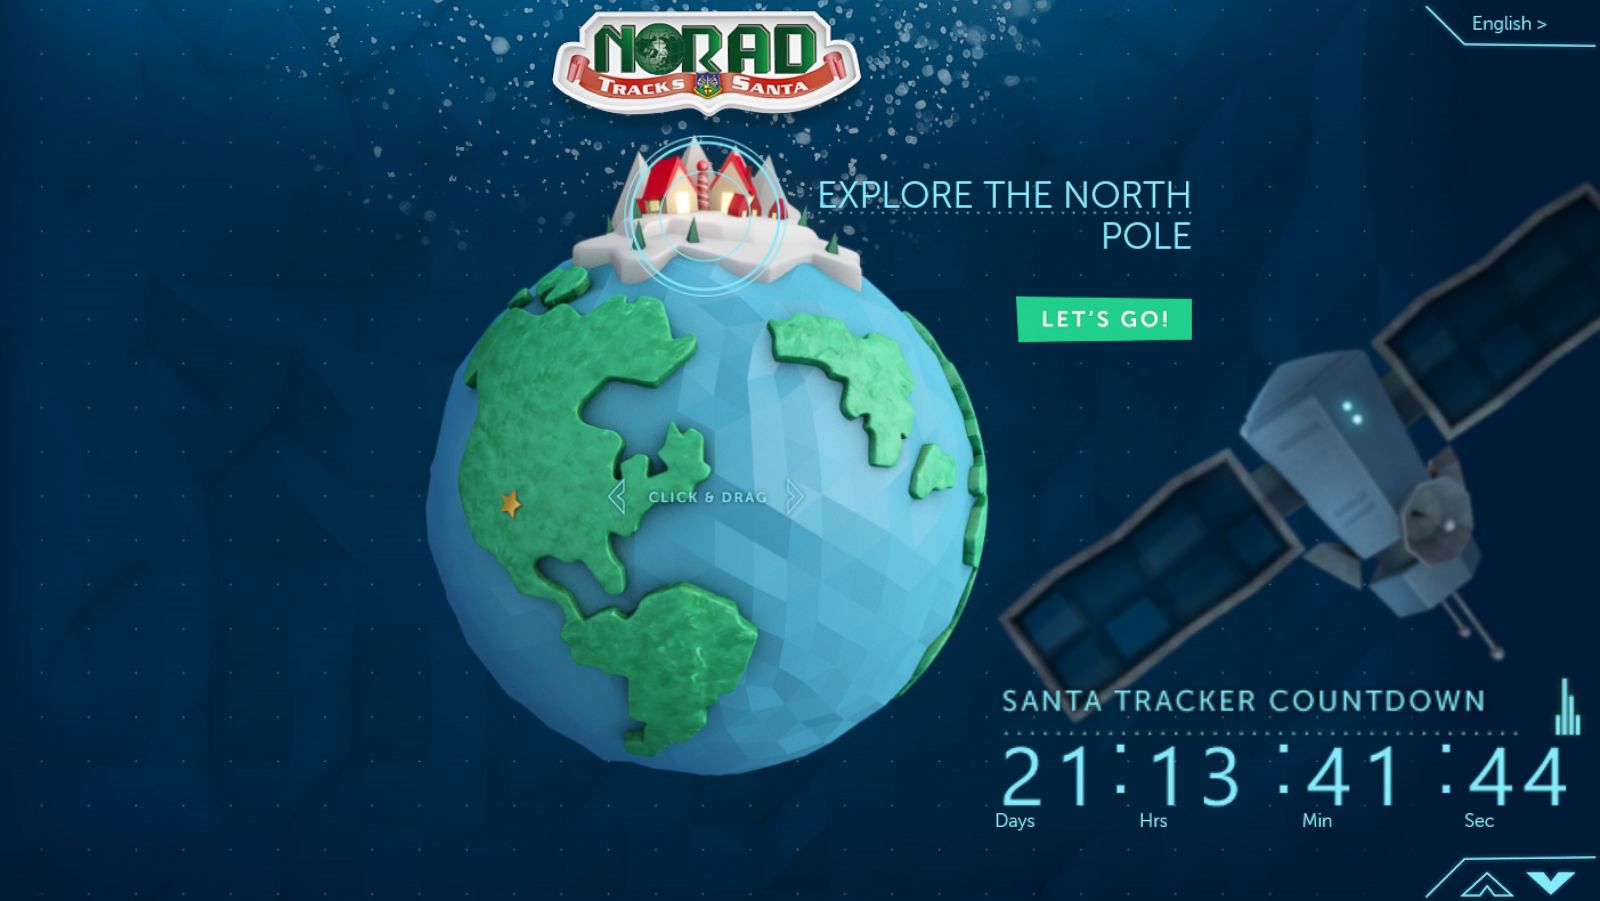 With Help from Microsoft, NORAD Launches Improved Santa Tracker